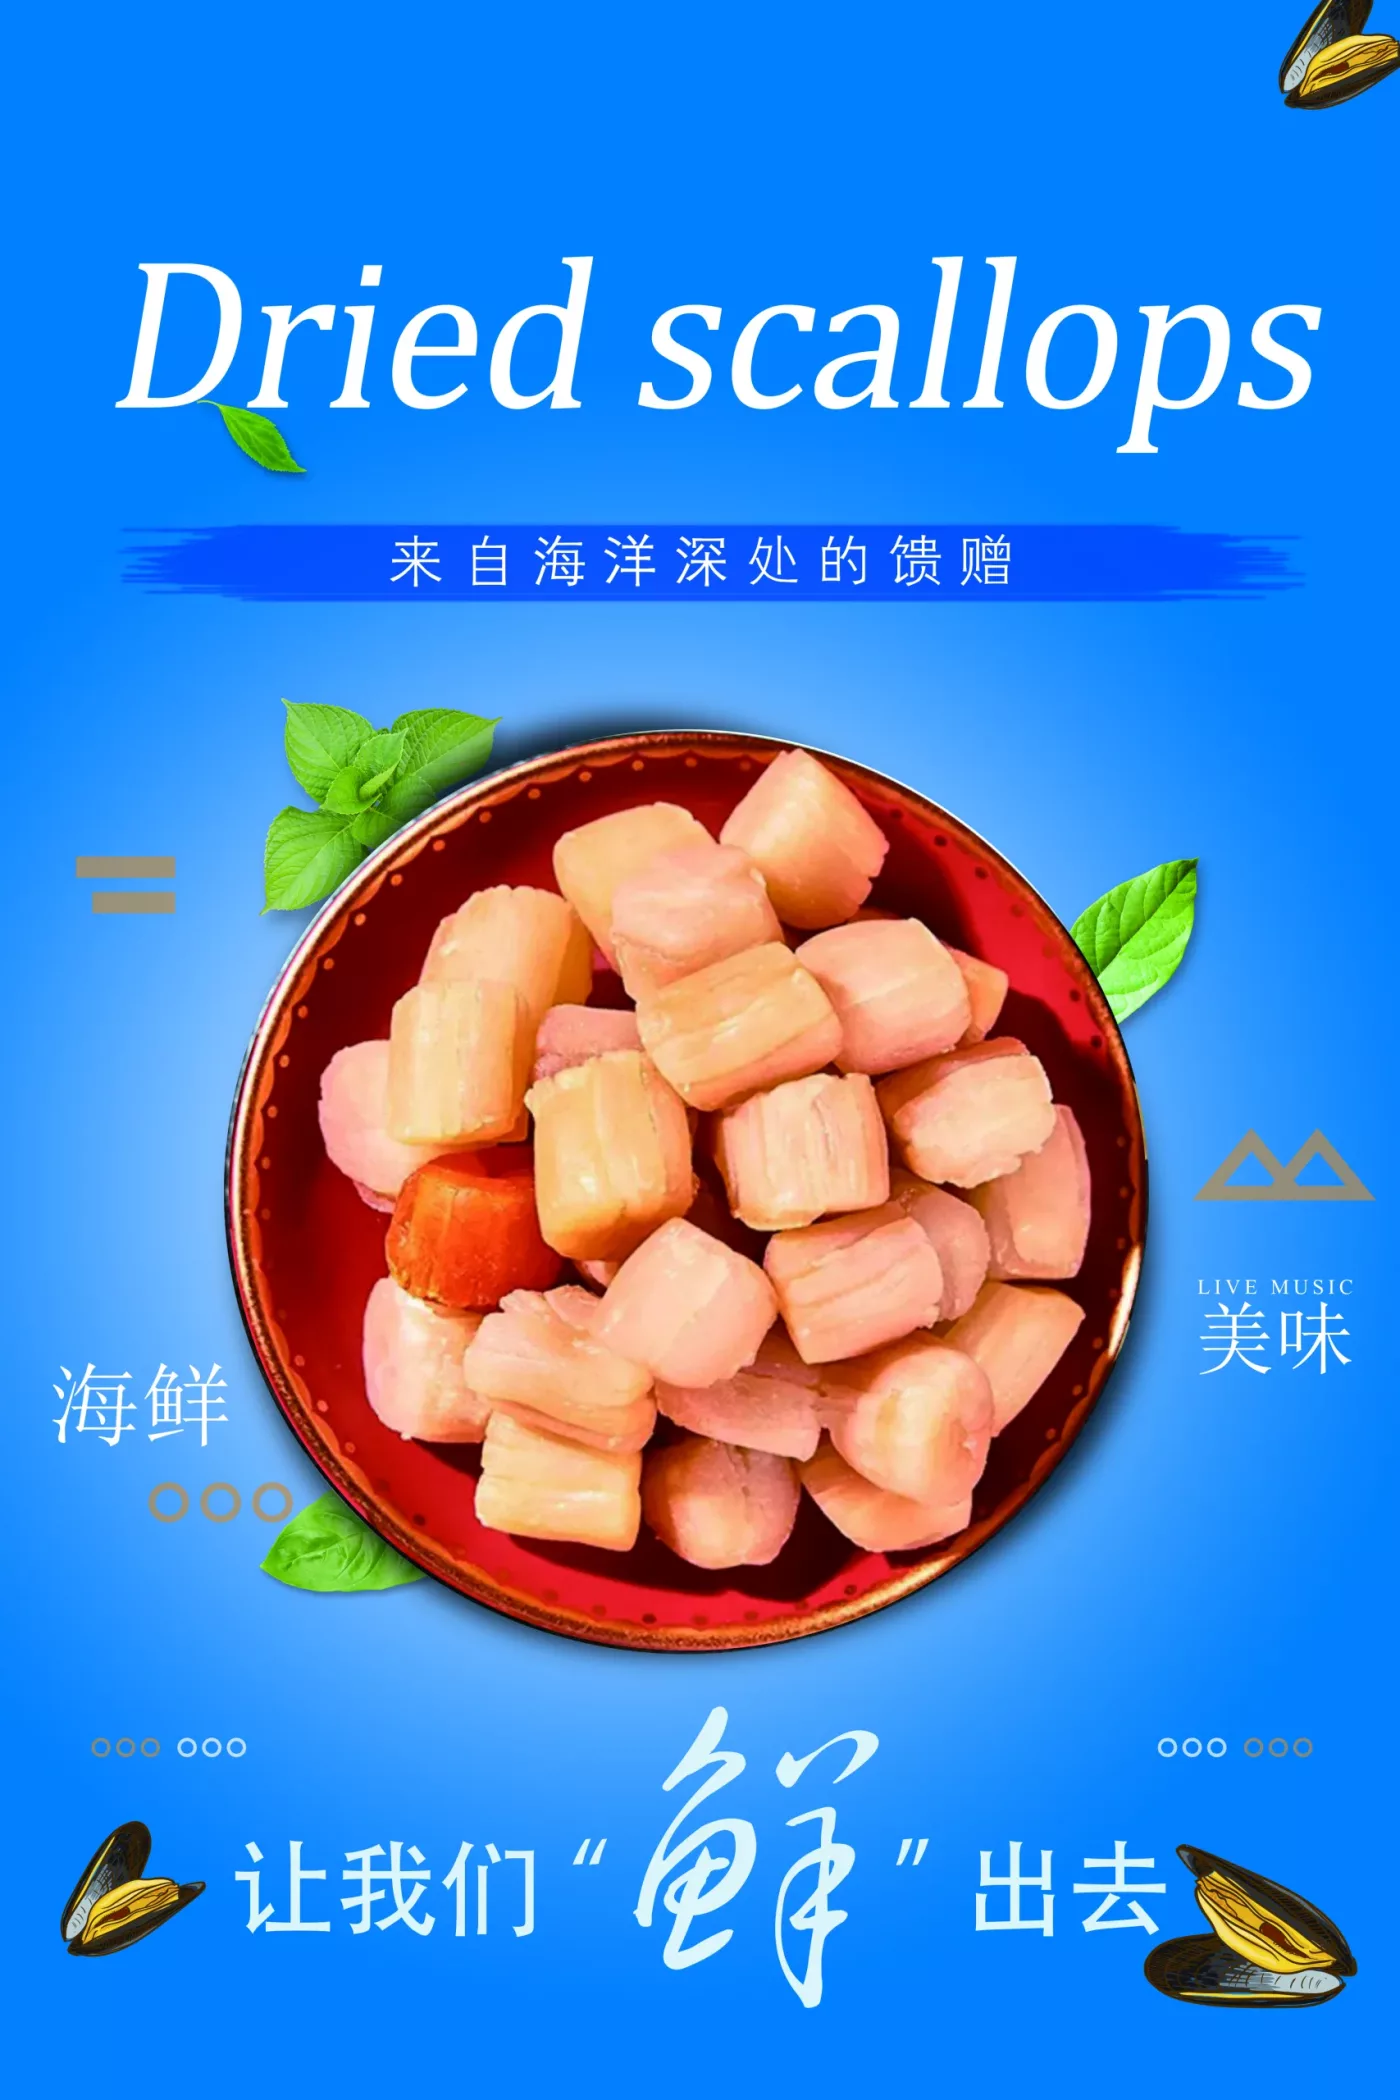 Chinese Dried scallops